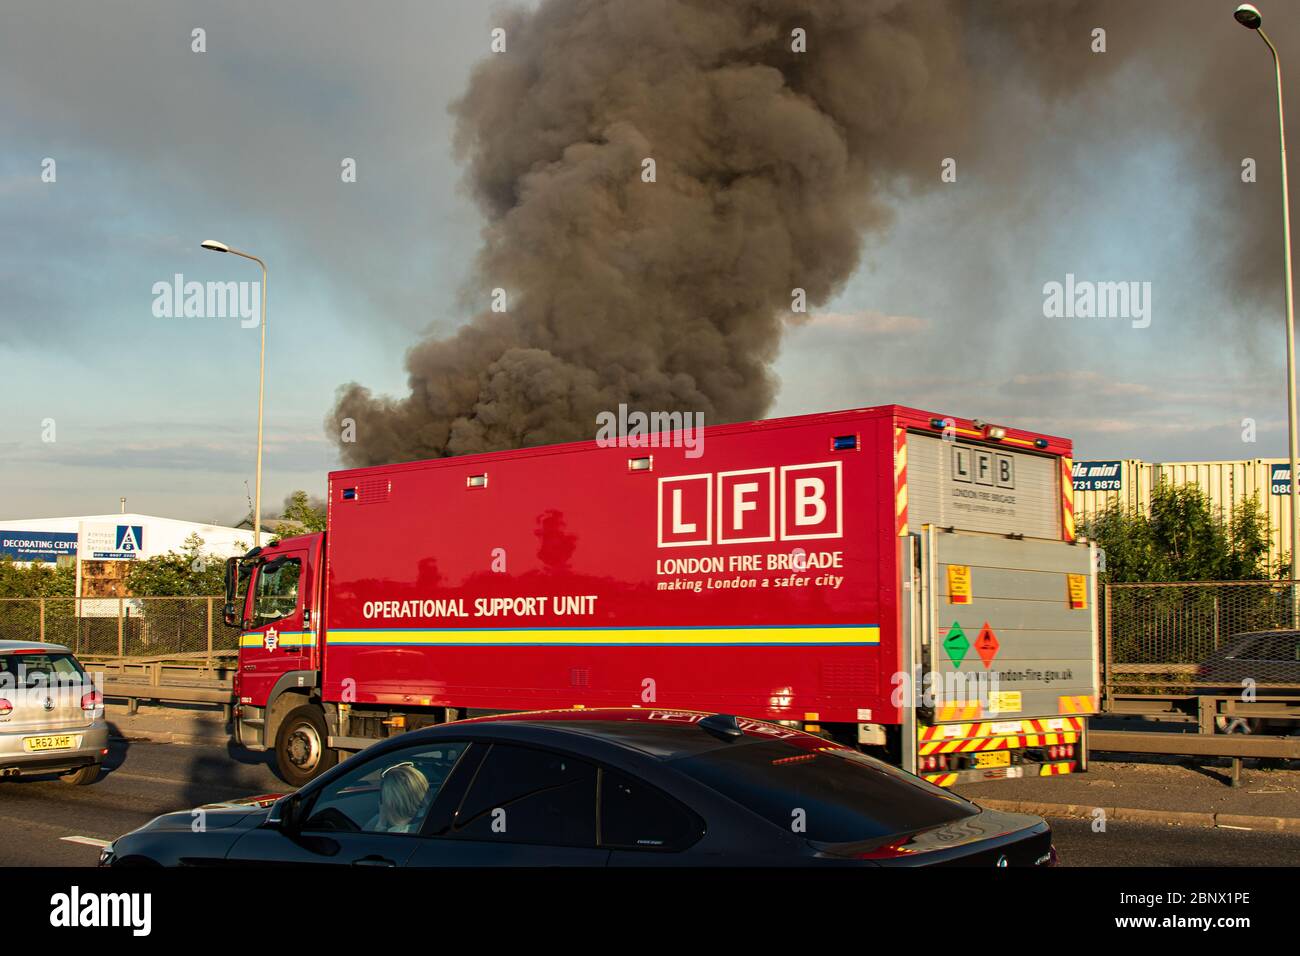 Over 100 Firefighters tackle a blaze at Saimaxx Bulders Merchants on Alfreds Way Barking, London. Friday 16th May 2020. Stock Photo